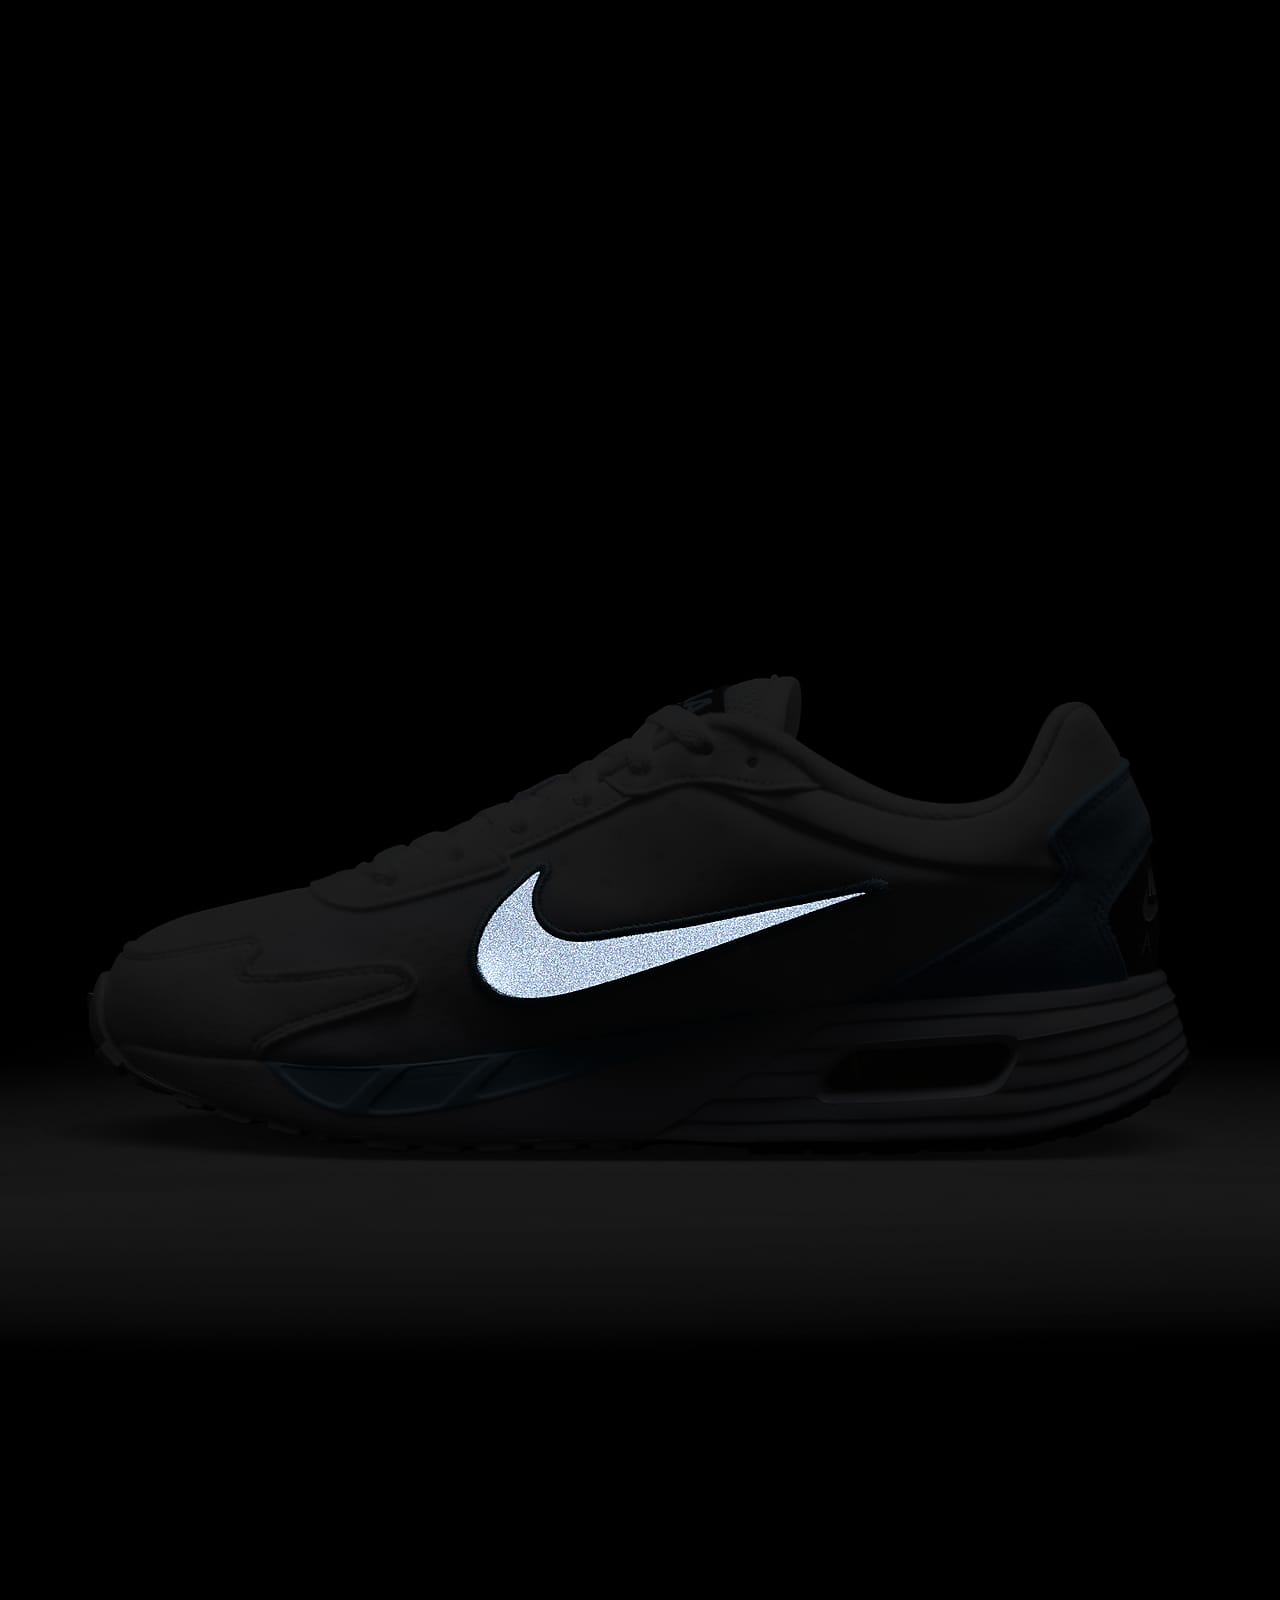 Nike Air Max Solo Men's Shoes.